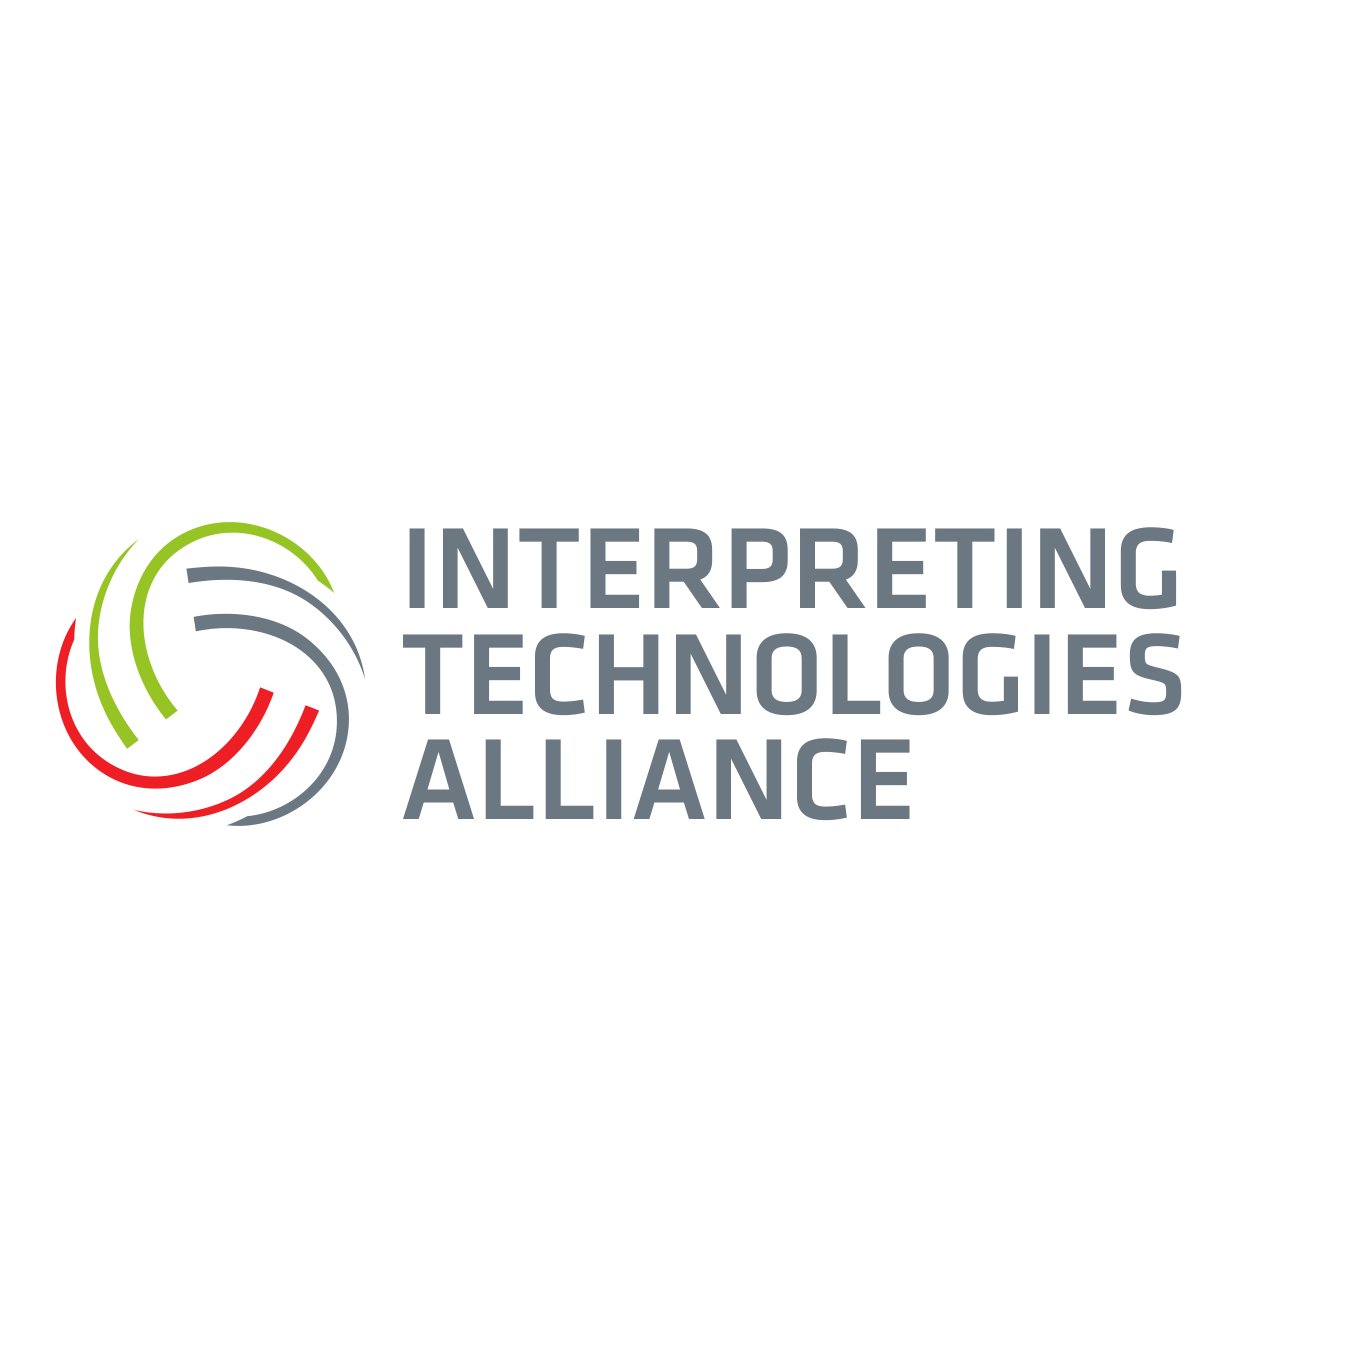 The Interpretation Technologies Alliances, the non-profit initiative is an advocacy effort to embrace interpreting in new and exciting ways
https://t.co/793VZ0GvlA